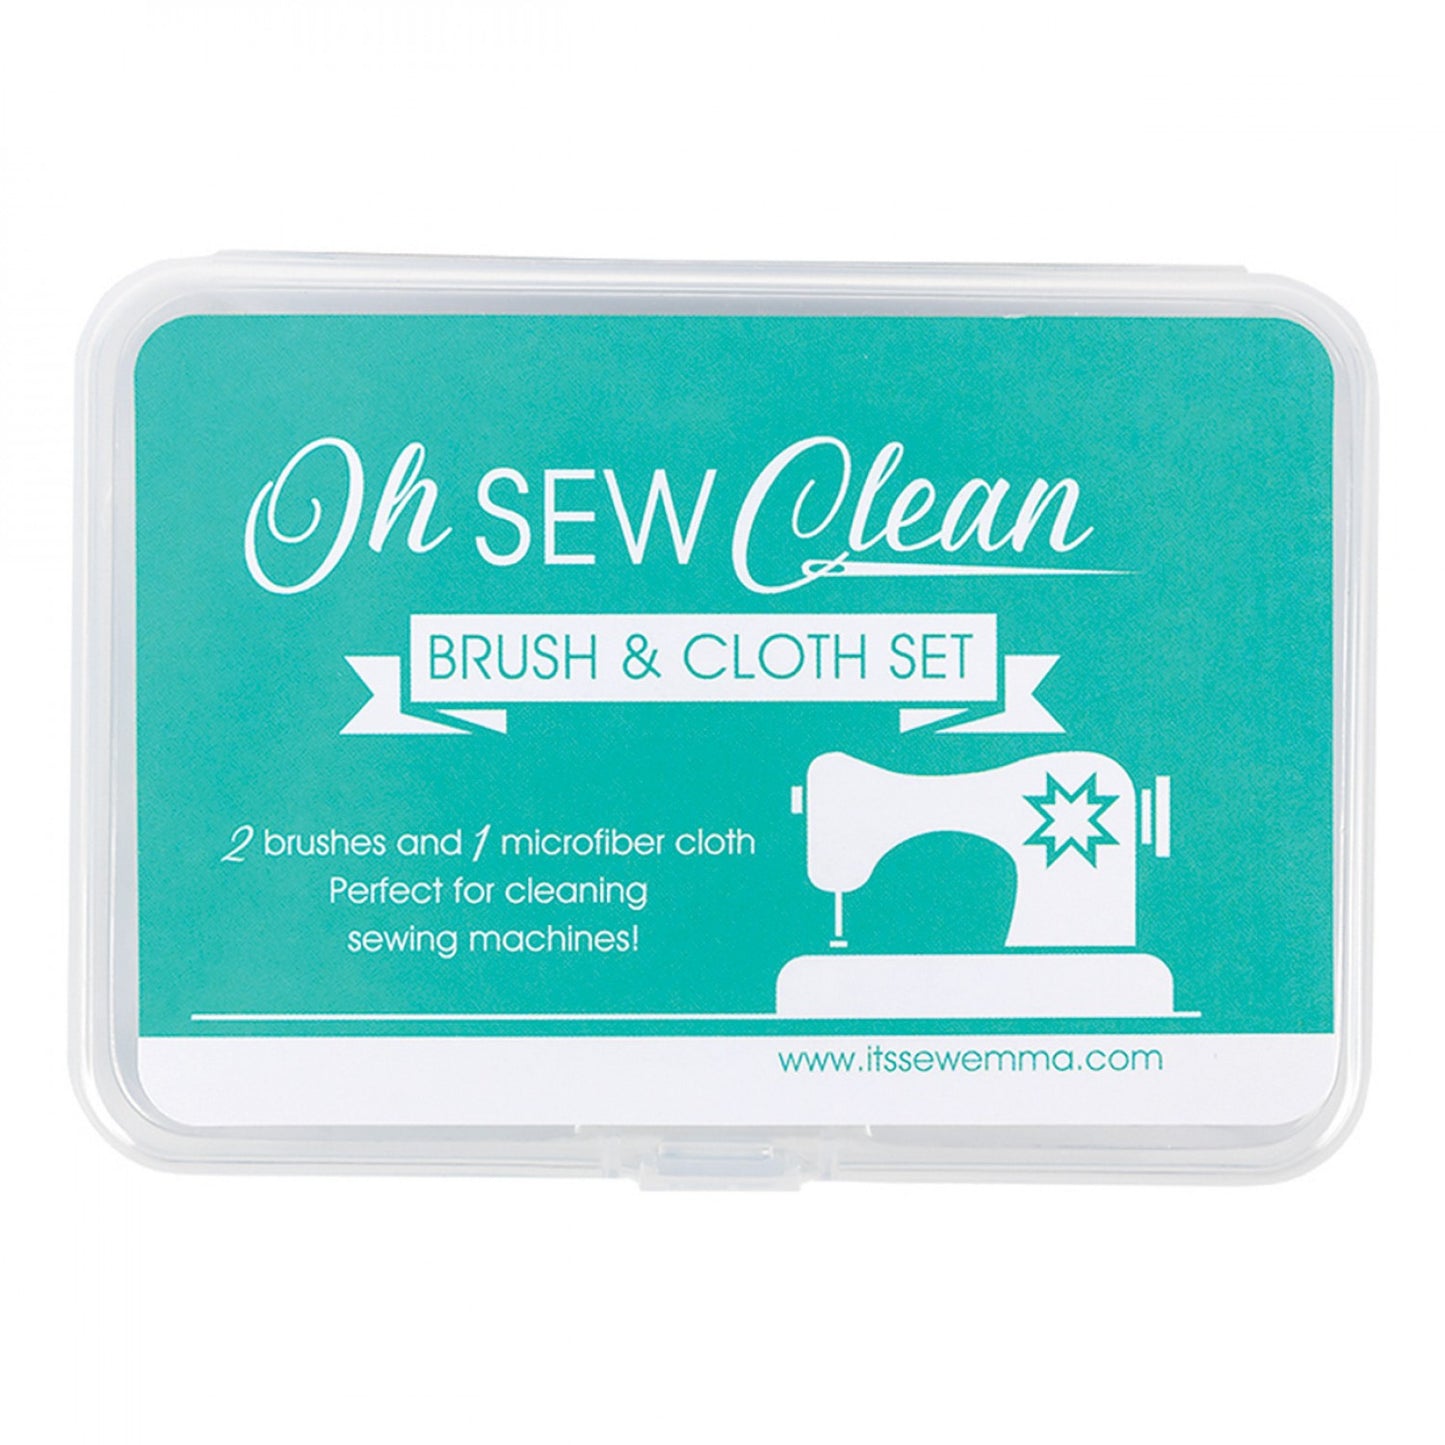 Oh Sew Clean Brush & Cloth Set, Multiple Colors